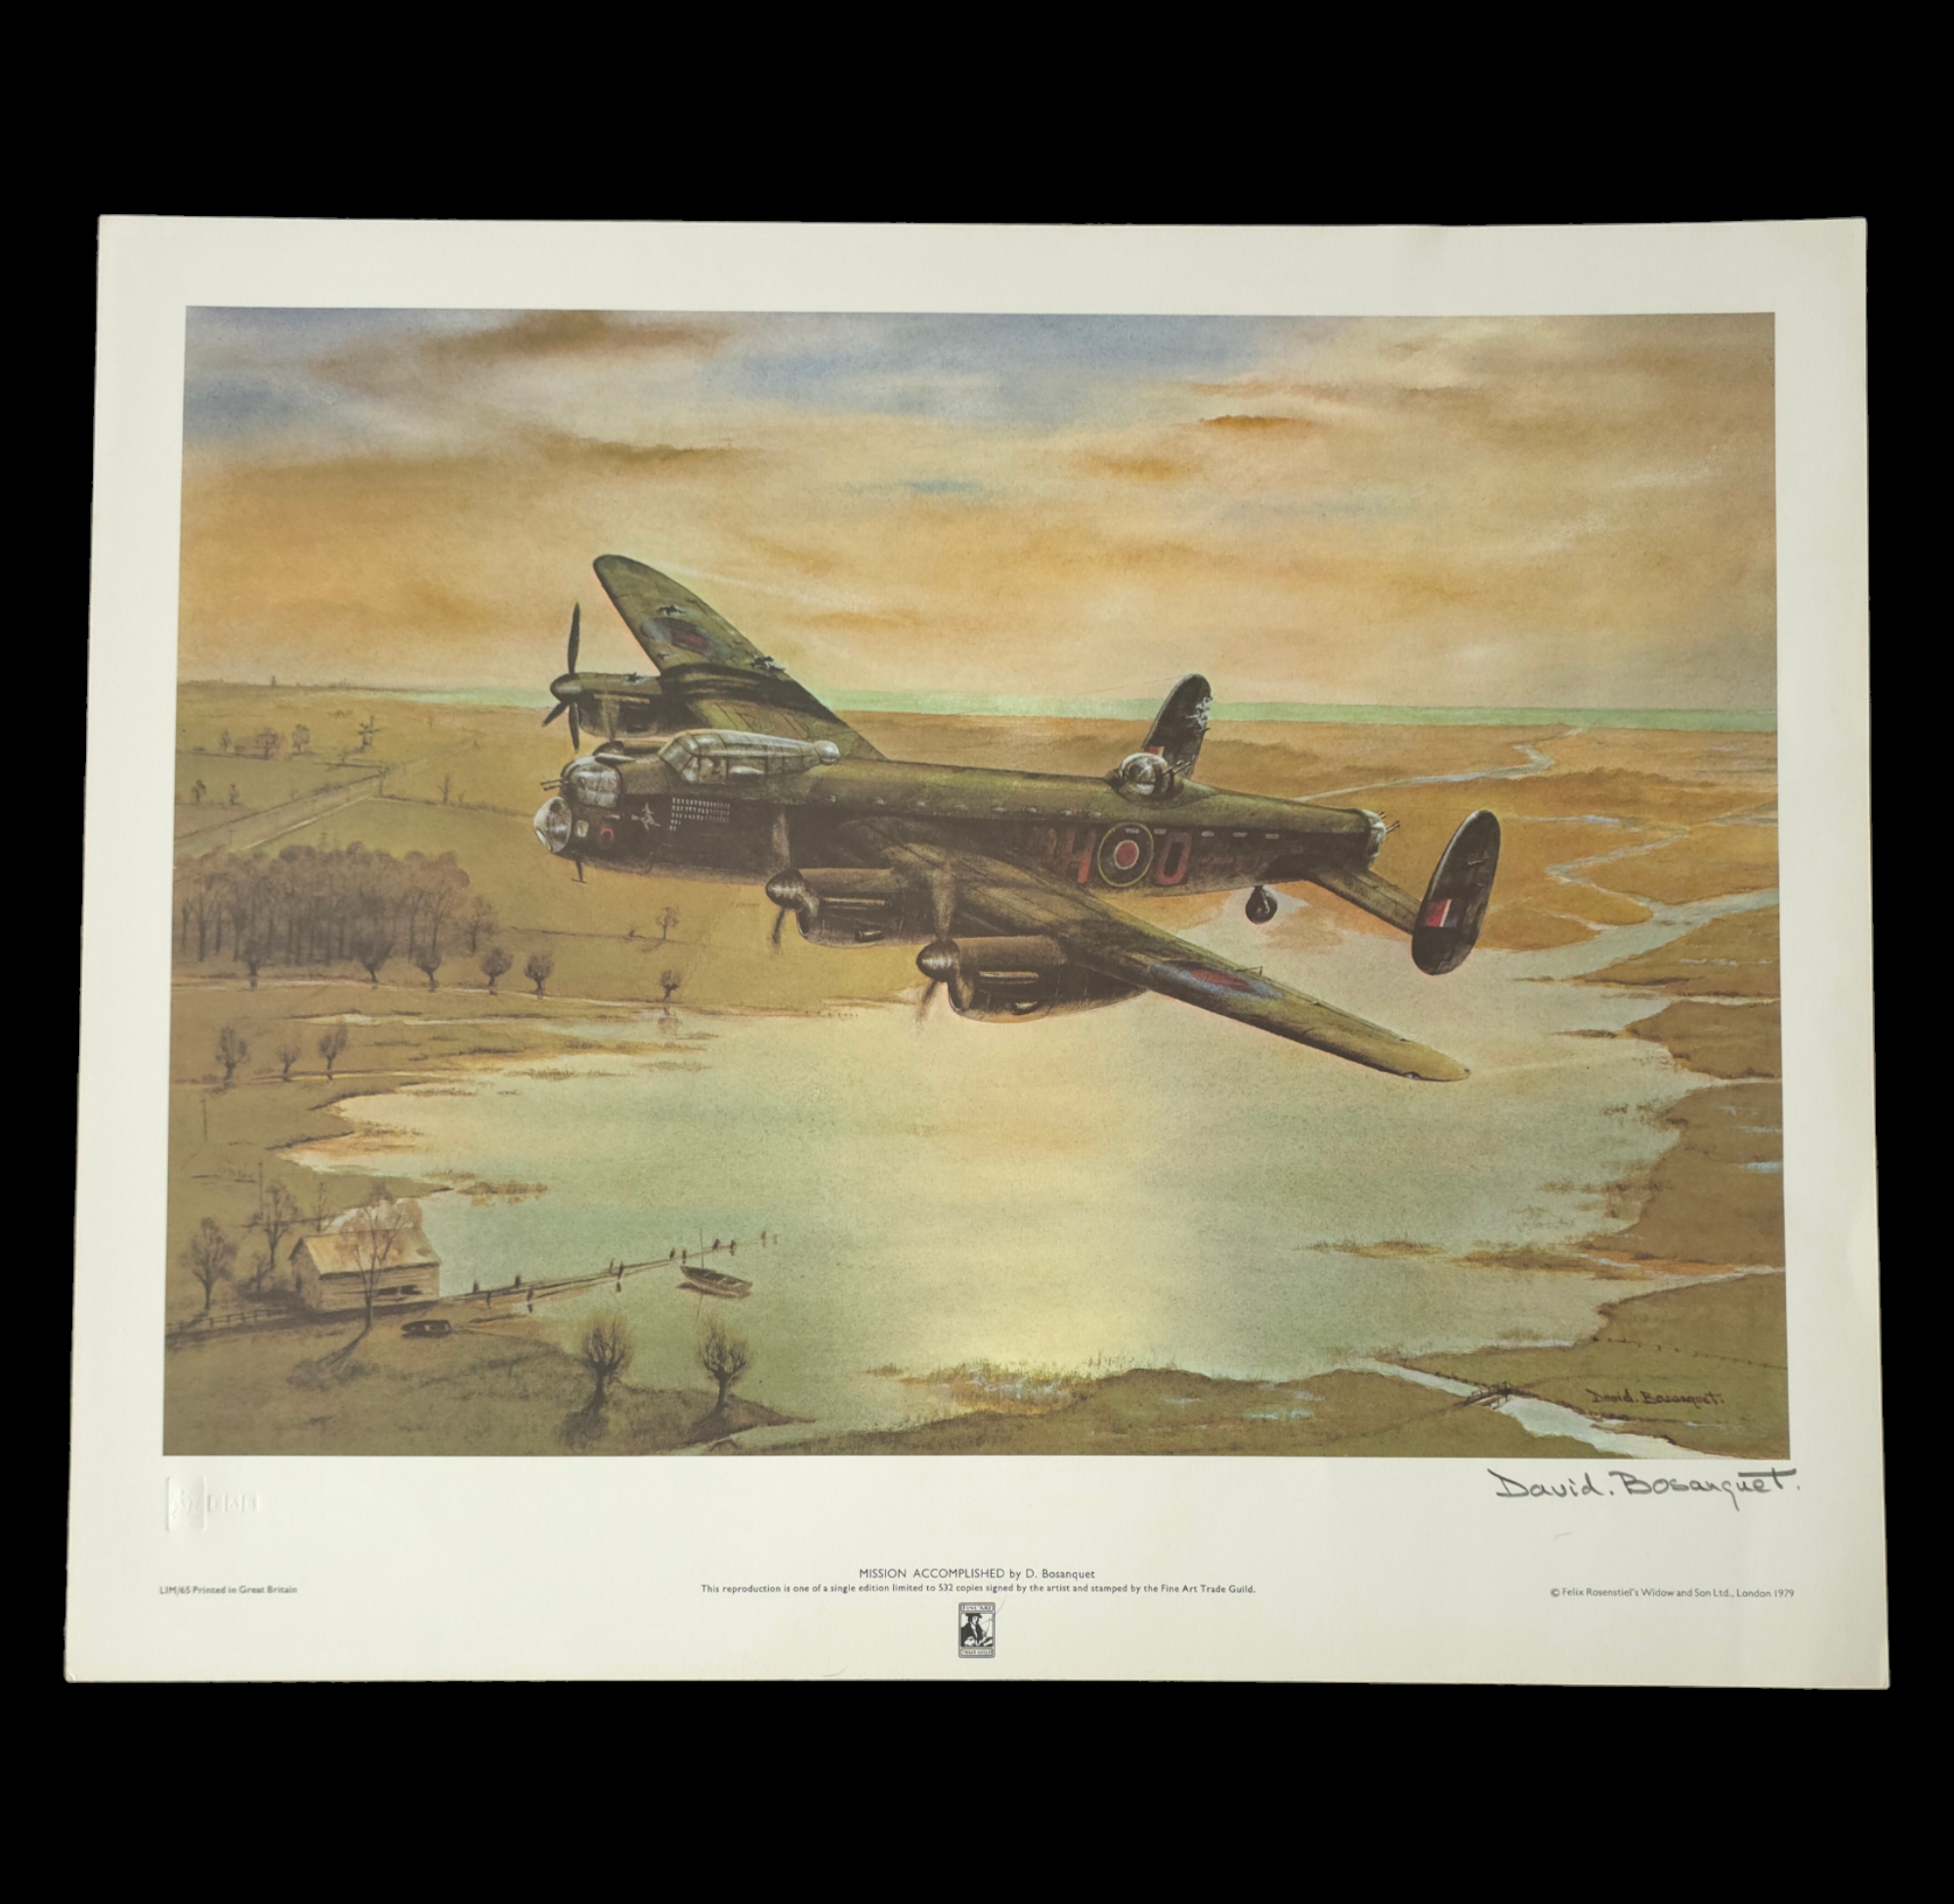 WW2 Colour Print Titled Mission Accomplished by David Bosanquet. Signed in Pencil by David Bosanquet